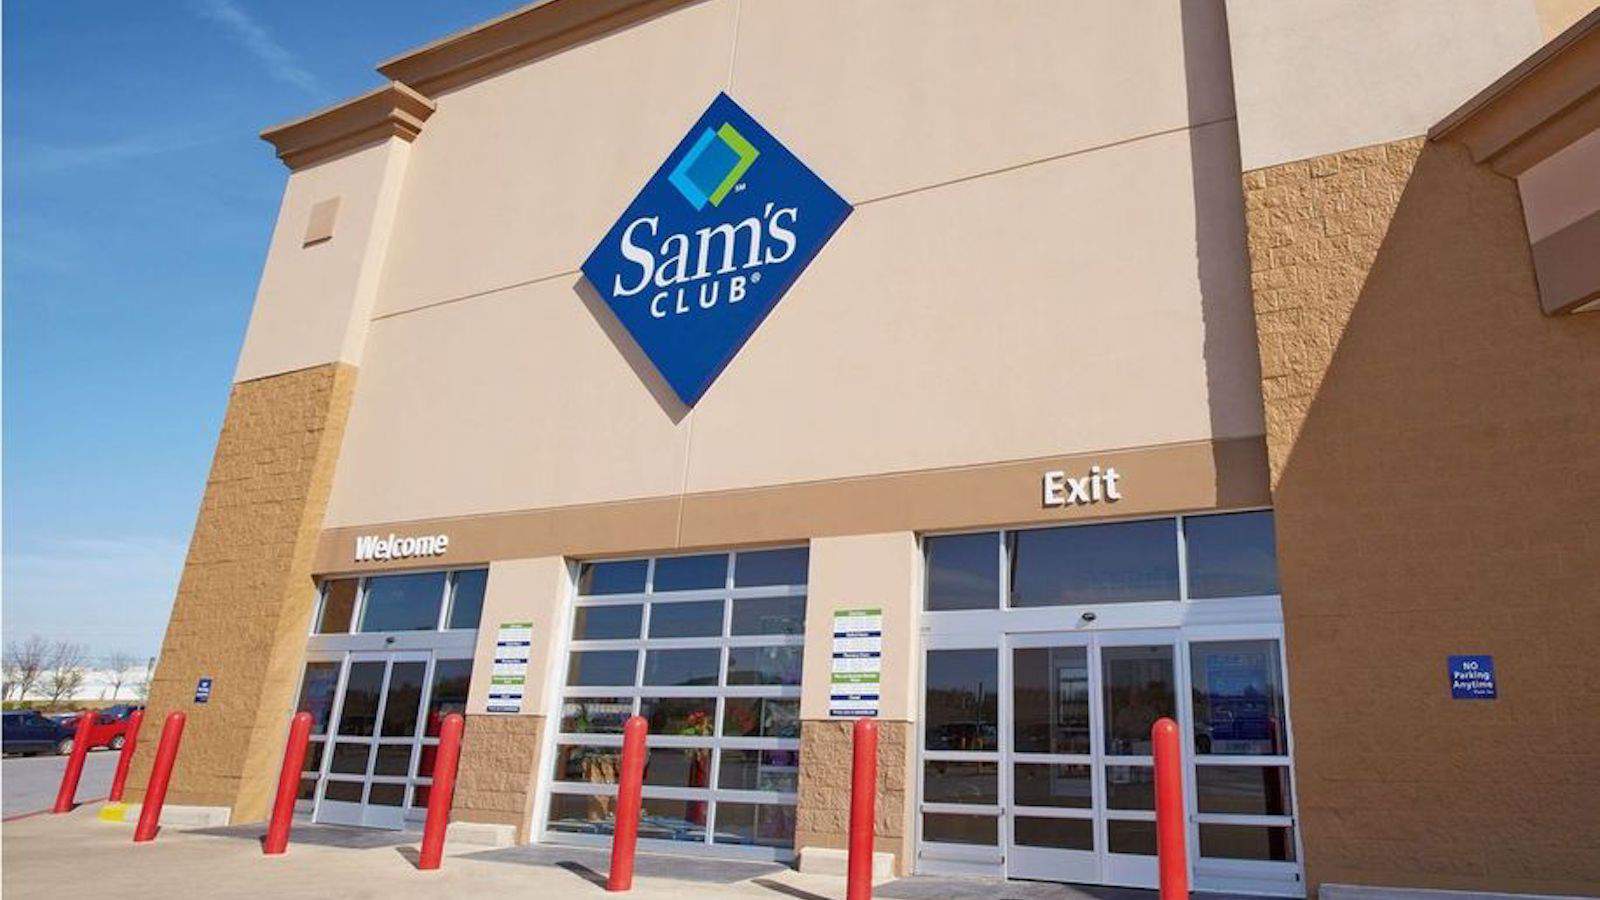 Grab a Sam’s Club membership today and get free food for just $29